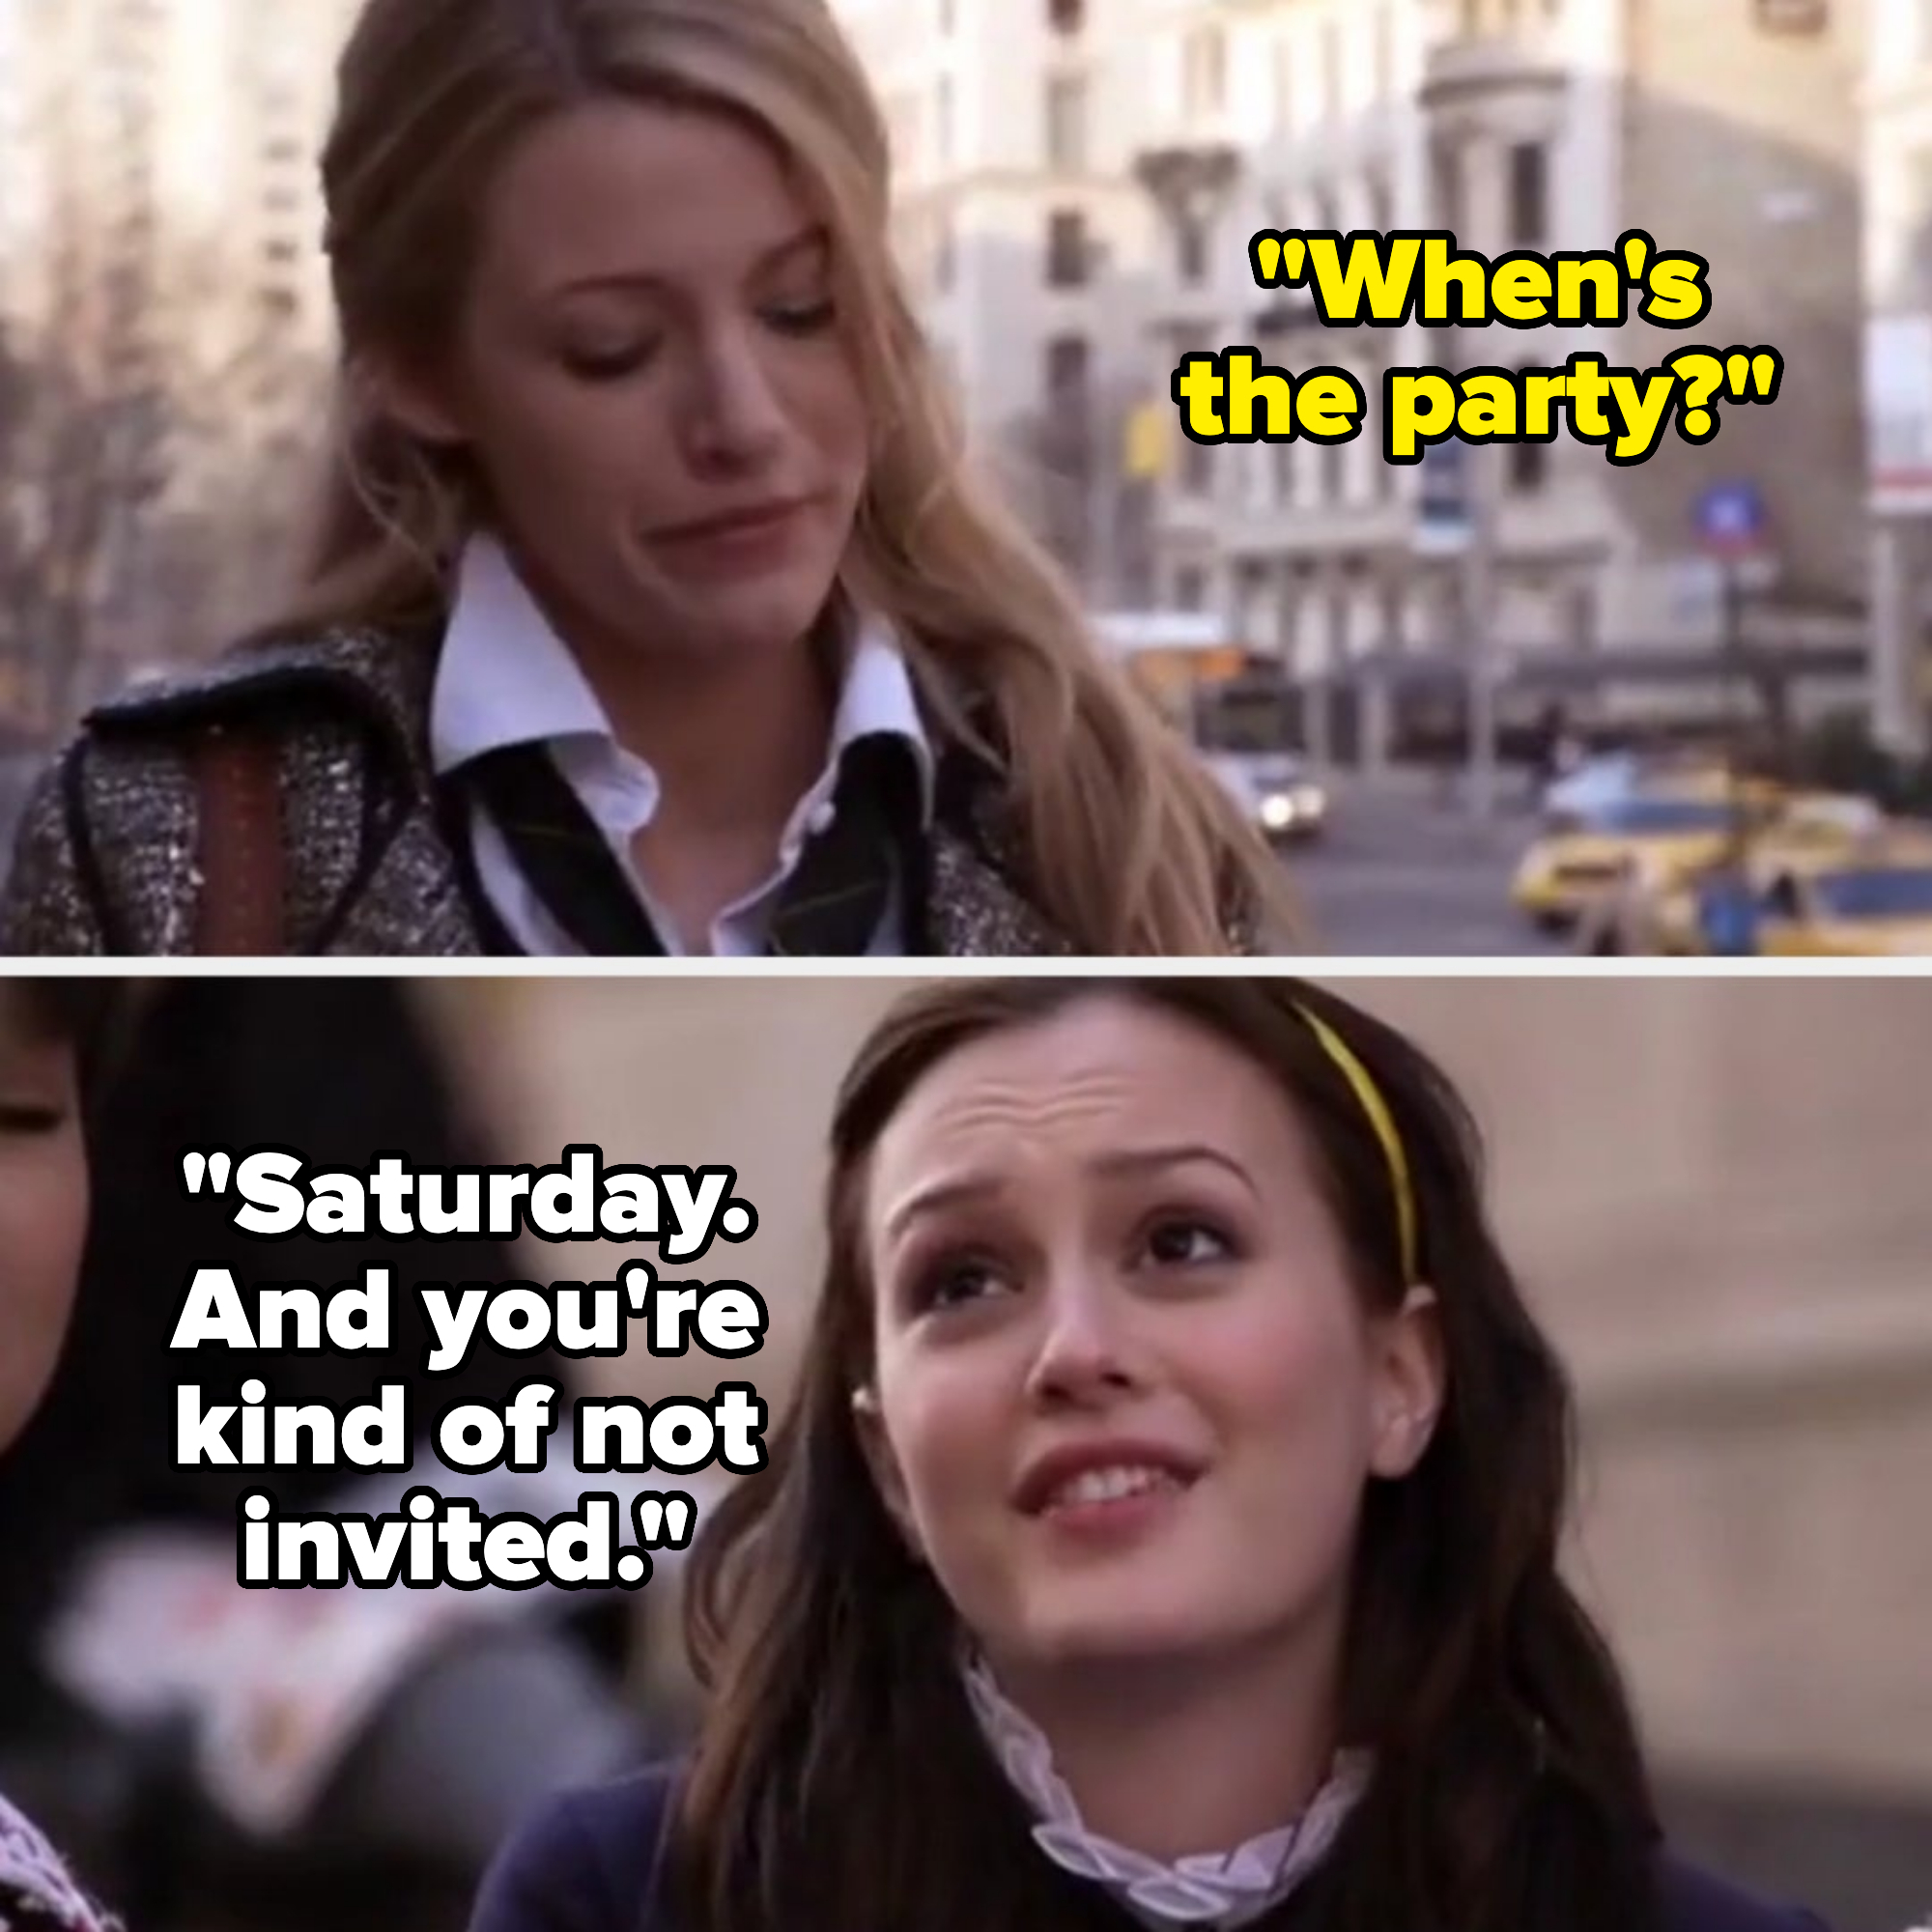 Blake Lively and Leighton Meester in a scene from &quot;Gossip Girl.&quot; Lively is looking down, and Meester is talking, with city buildings in the background